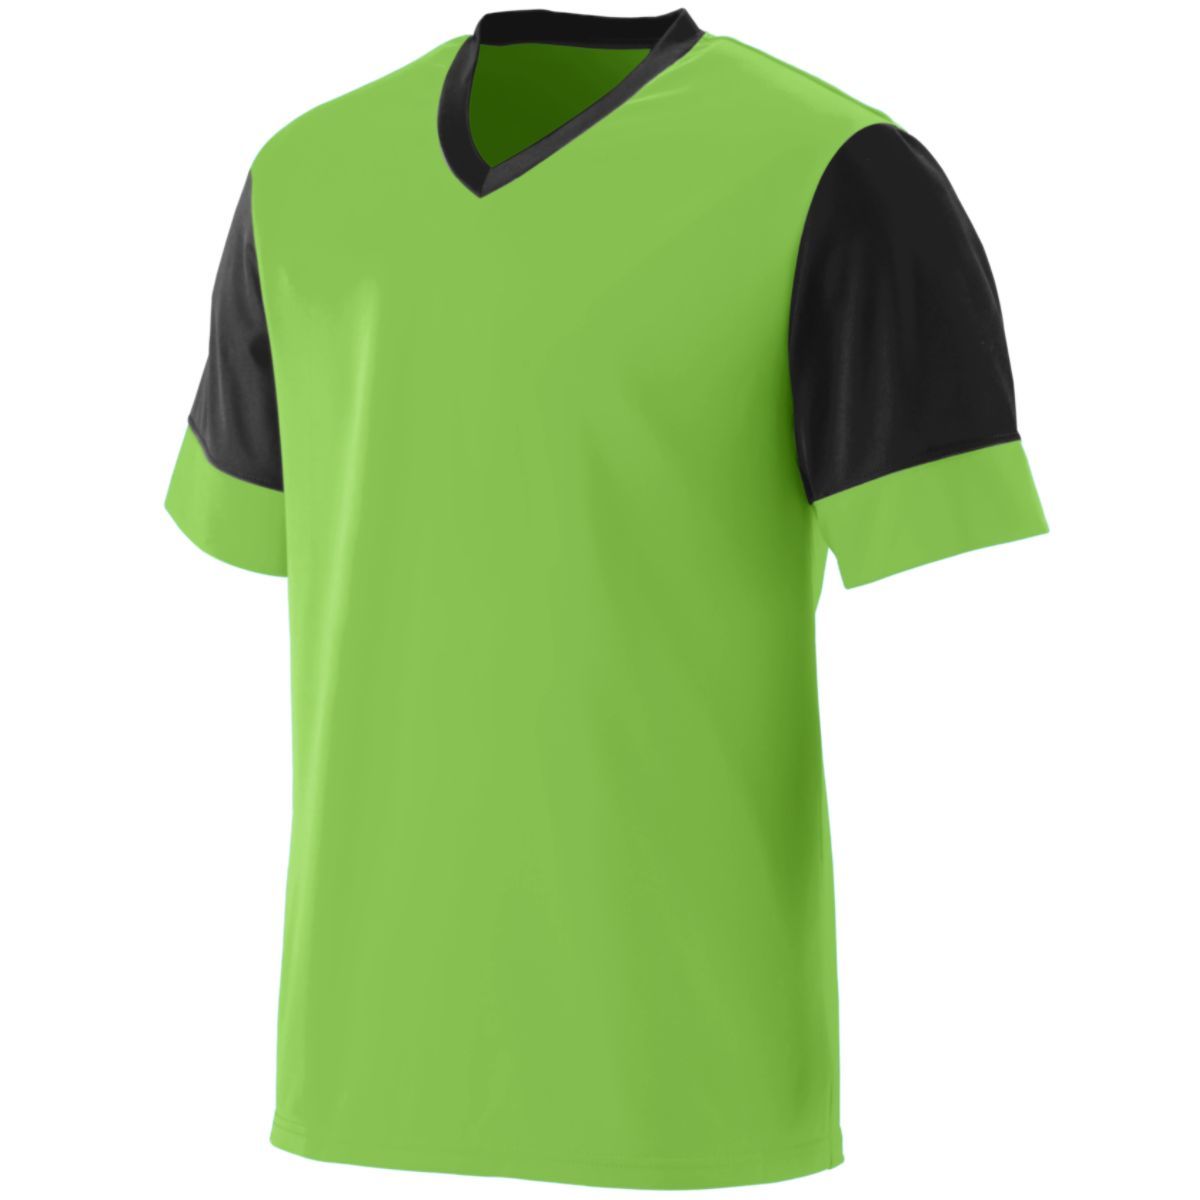 Augusta Sportswear Youth Lightning Jersey in Lime/Black  -Part of the Youth, Youth-Jersey, Augusta-Products, Soccer, Shirts, All-Sports-1 product lines at KanaleyCreations.com